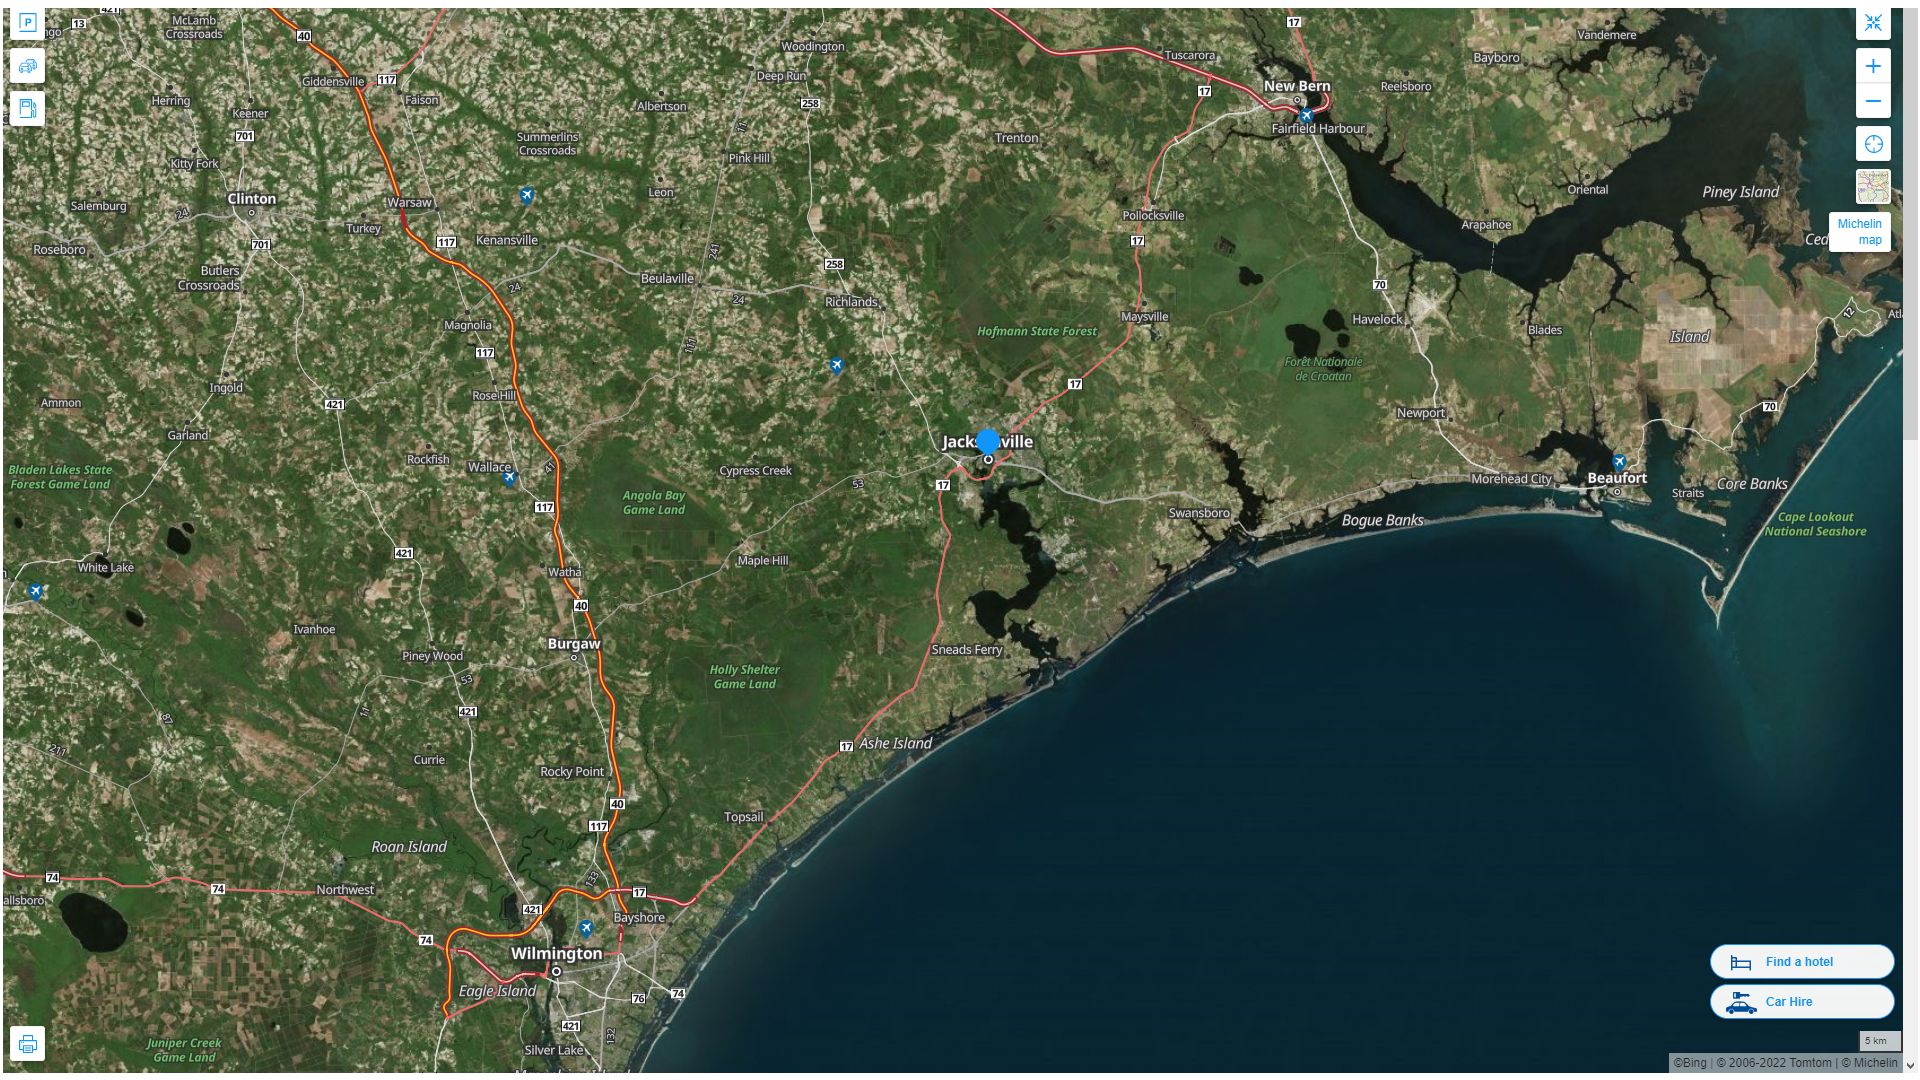 Jacksonville North Carolina Highway and Road Map with Satellite View